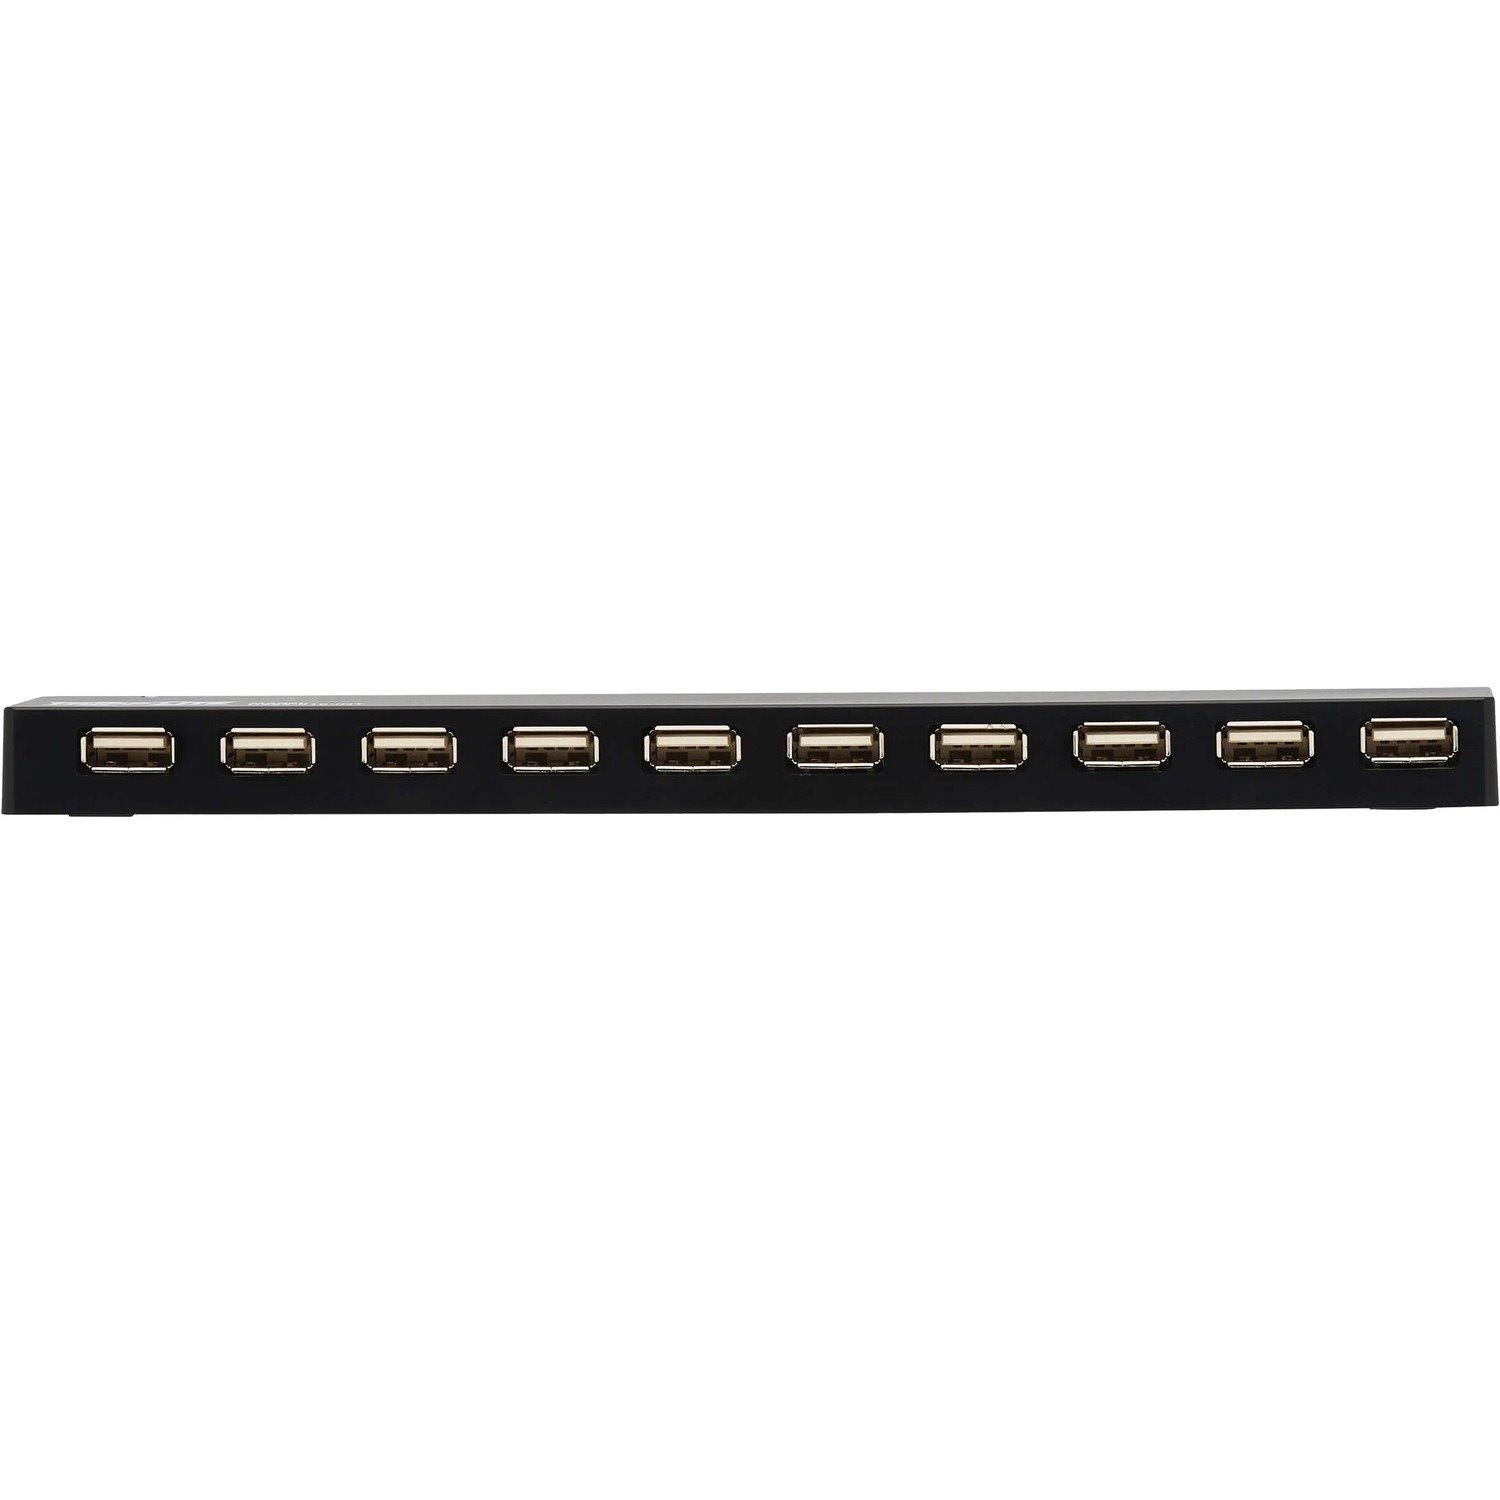 Tripp Lite by Eaton 10-Port USB 2.0 Hub with Power Supply and International Plug Adapters